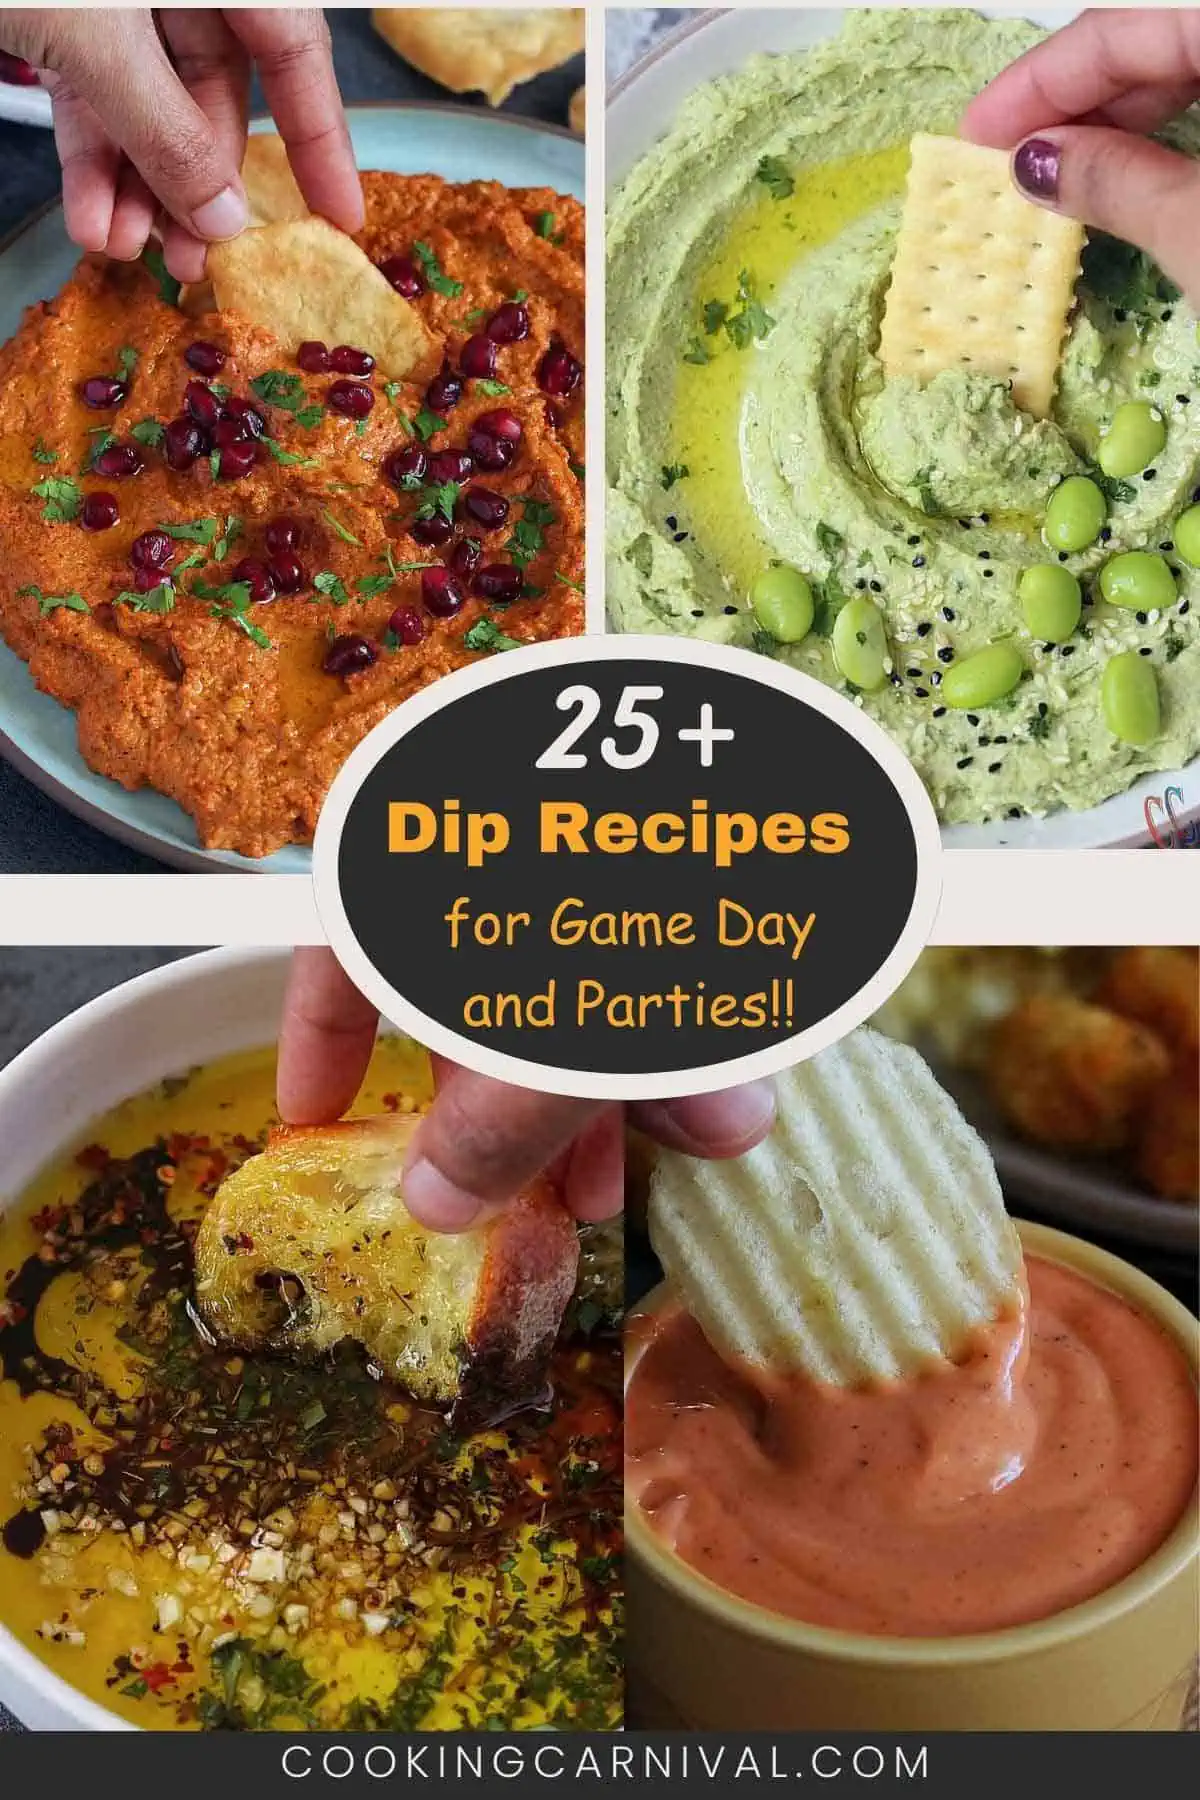 Easy dip recipes for parties and game day.